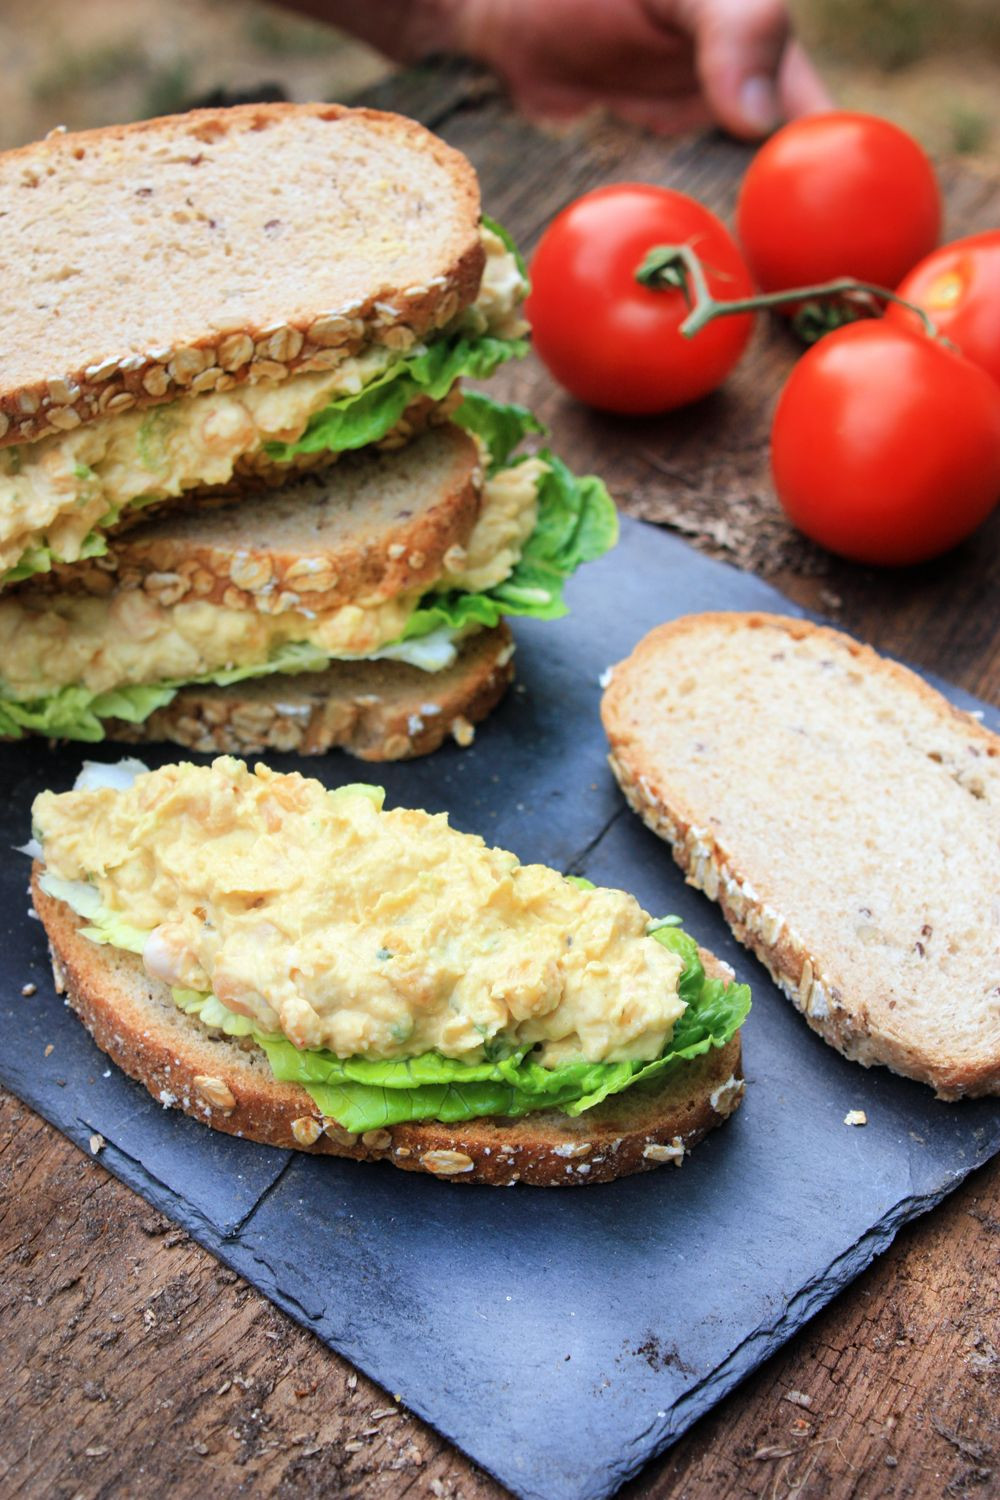 Healthy Side Dishes For Sandwiches
 Chickpea Eggless Mayonnaise Sandwiches